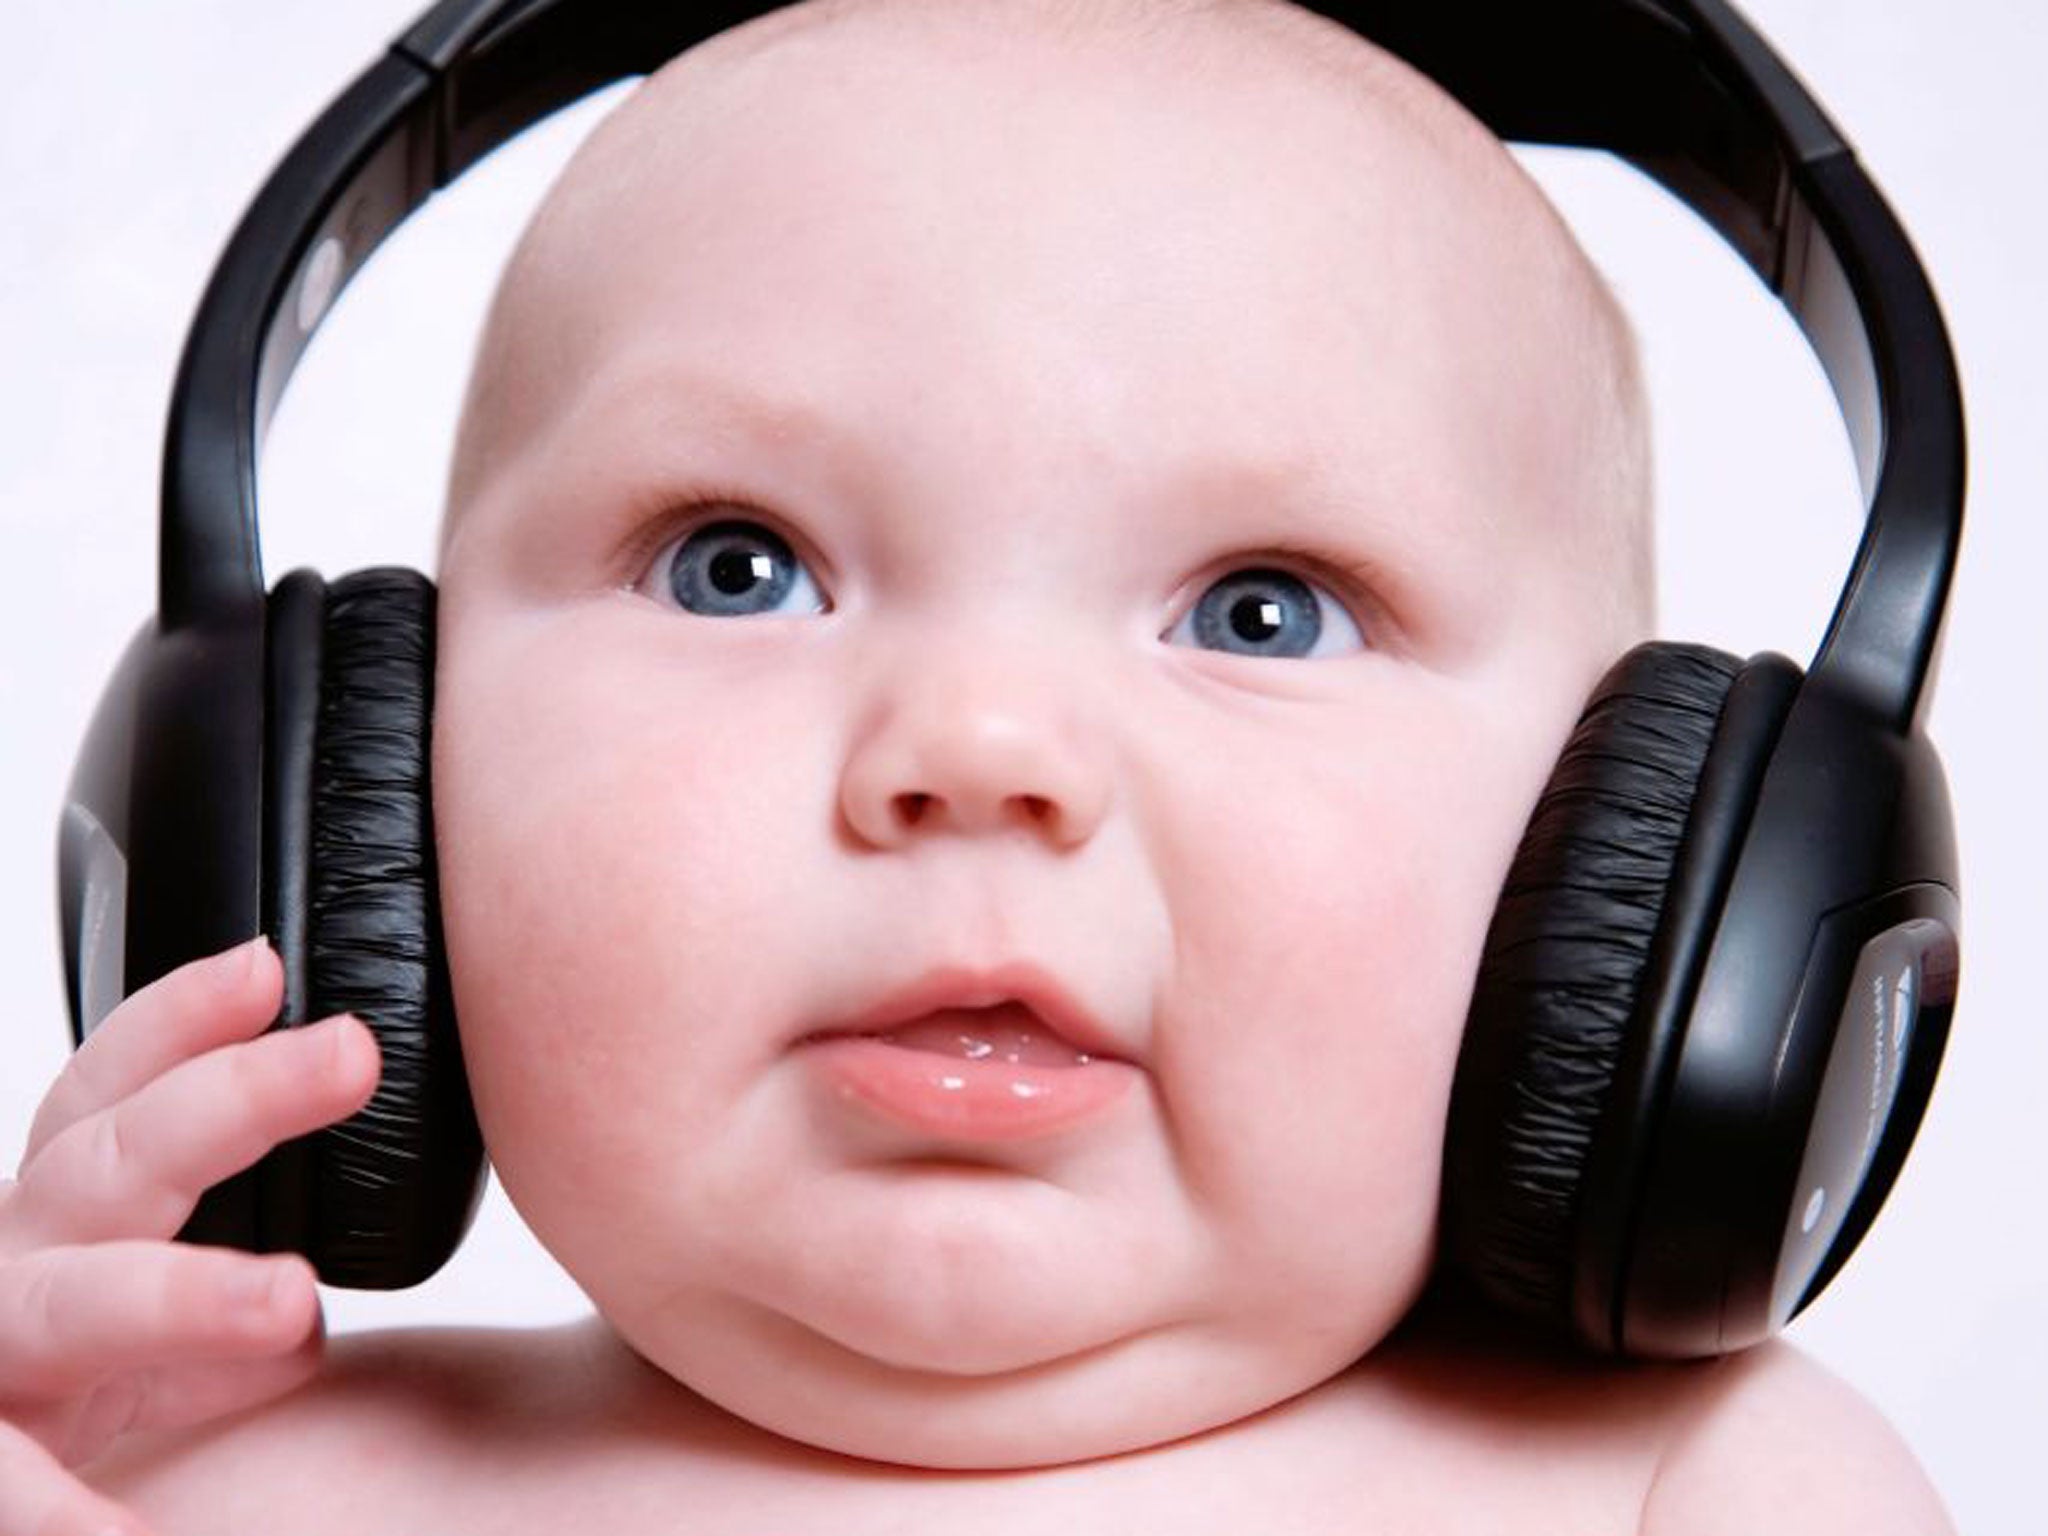 Want your baby to appreciate the rocking majesty of Blur’s “Song 2”, but are worried you might scare them?